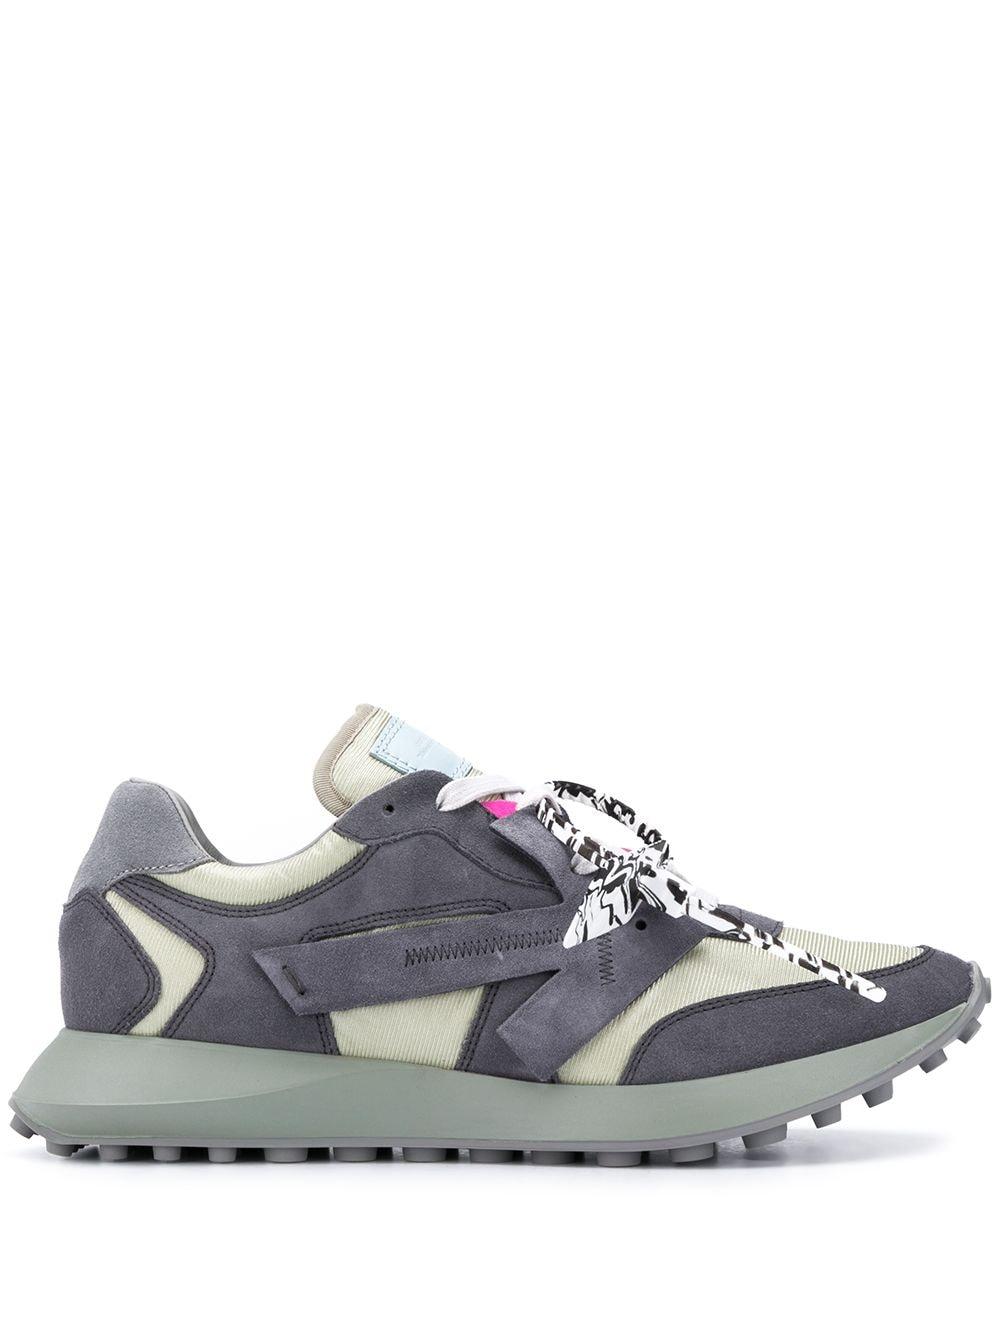 Off-White c/o Virgil Abloh Leather Arrows Low-top Sneakers in Grey ...